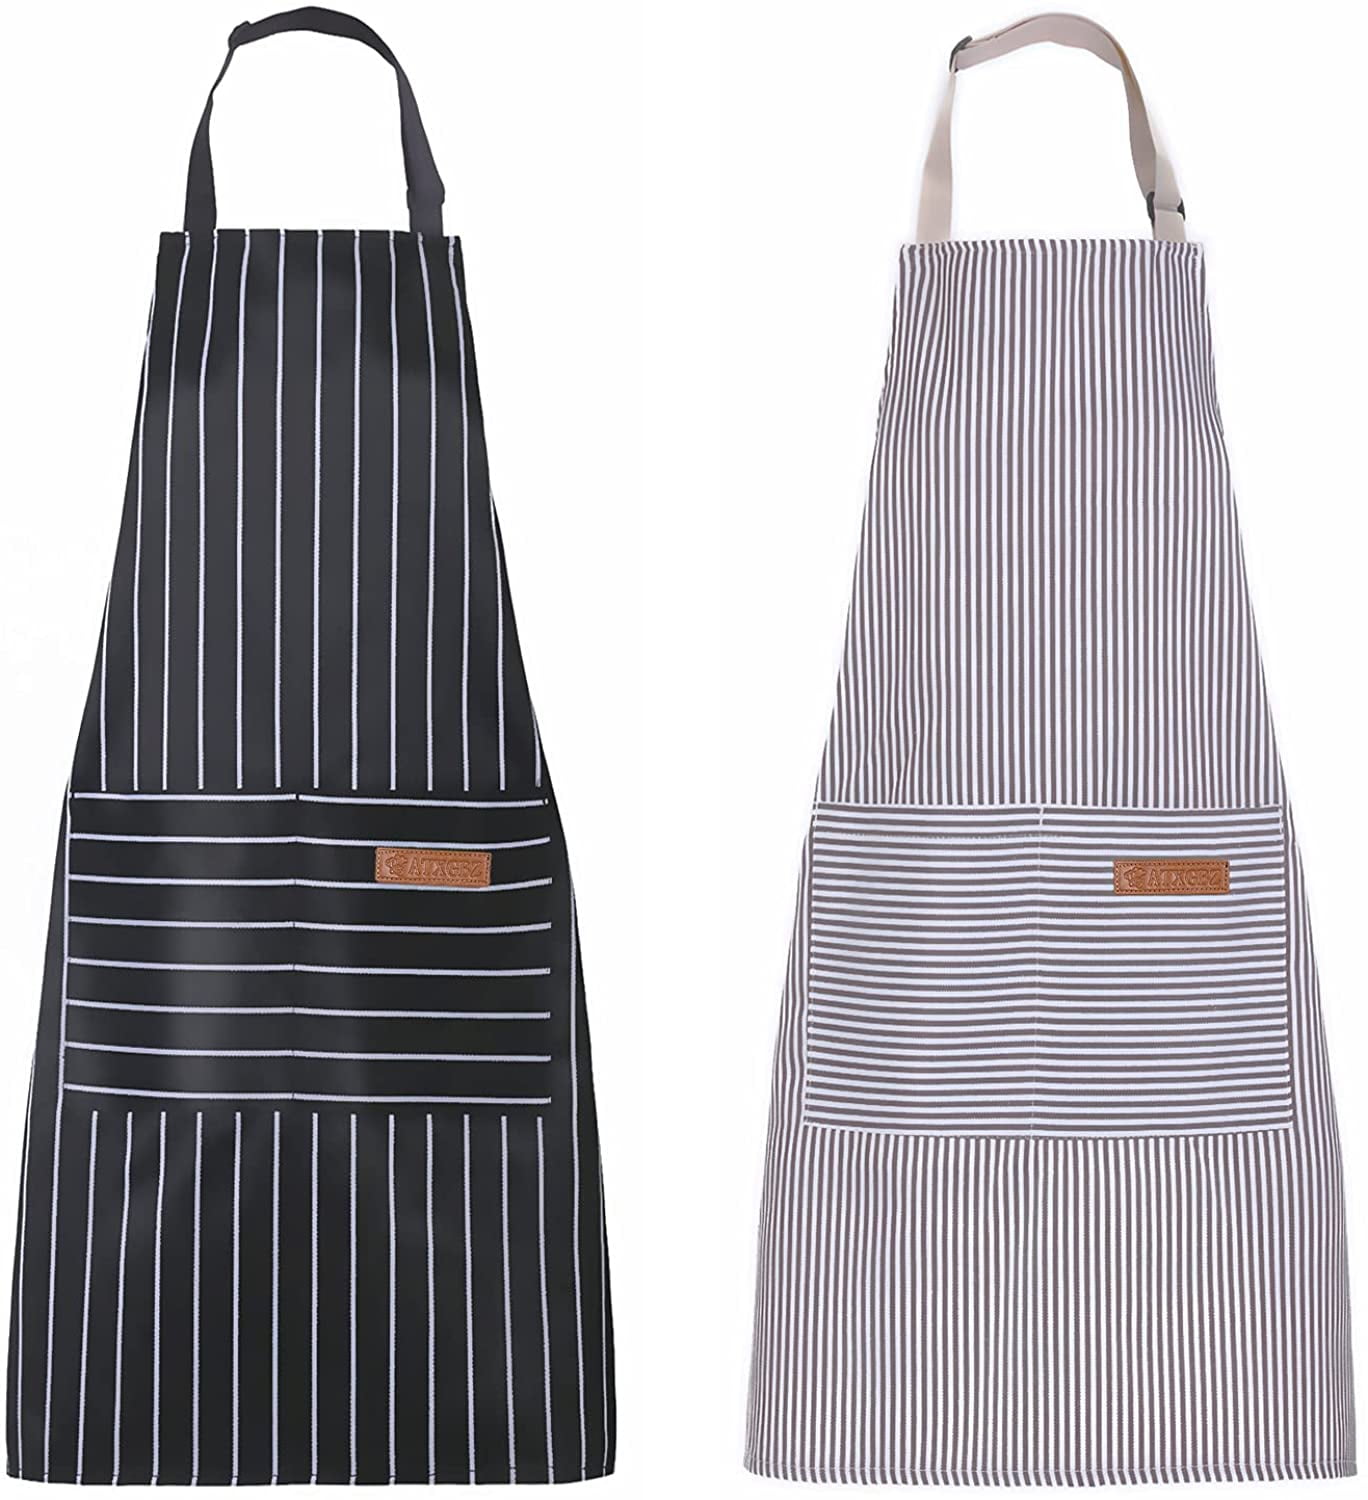 WHITE & BLUE STRIPED BBQ GRILLING APRON WITH POCKET ~ 29" X 40" ~NEW~LQQK RED 